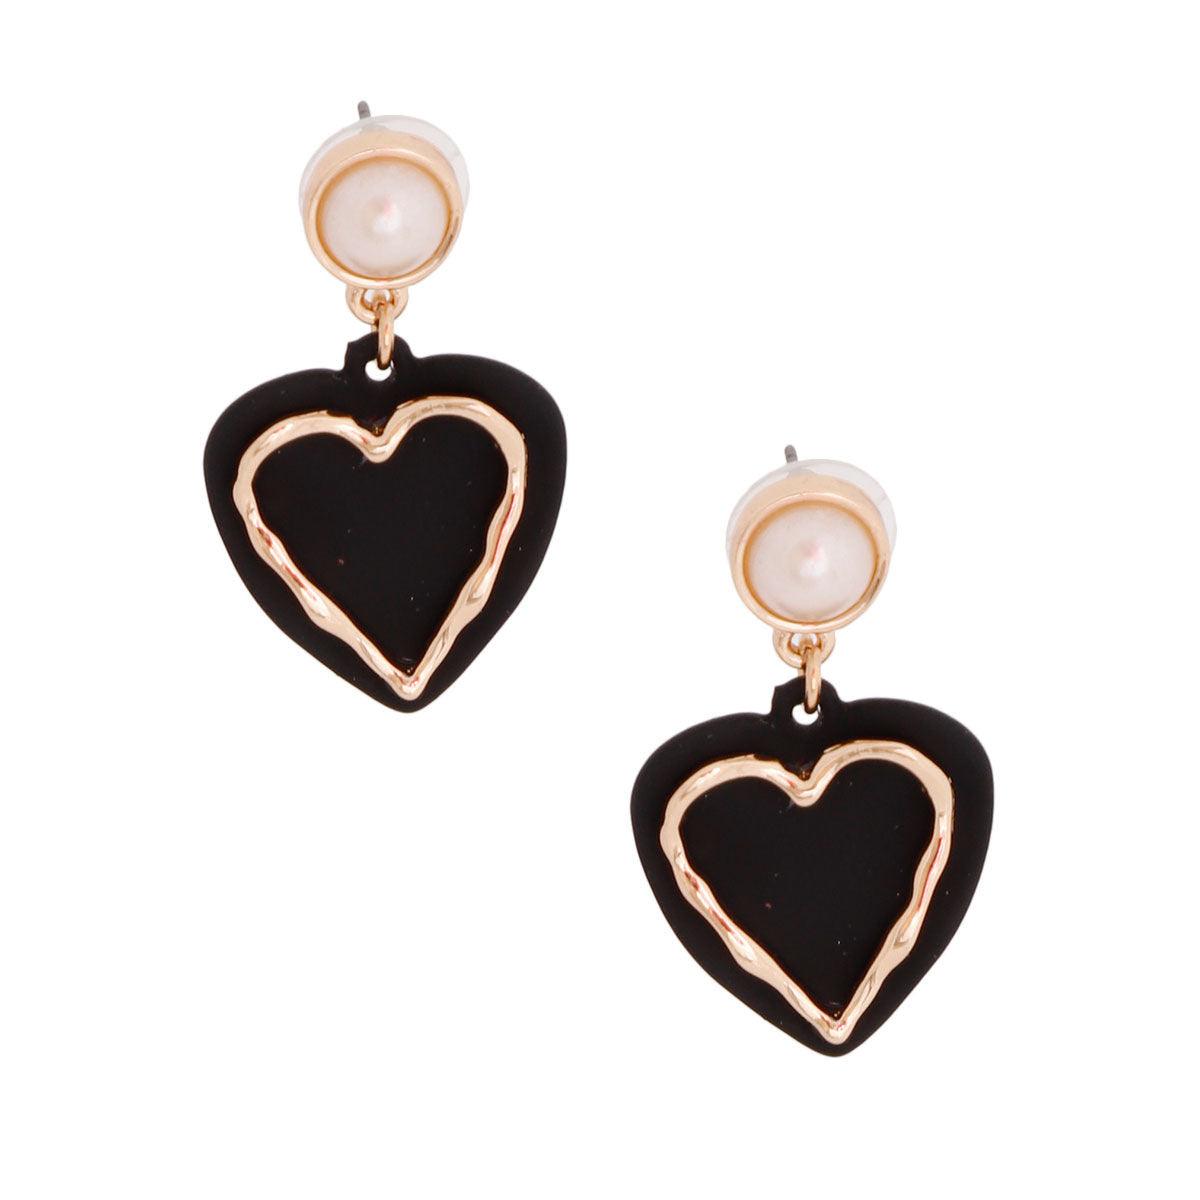 Add a Touch of Romance with Black Heart Drop Earrings